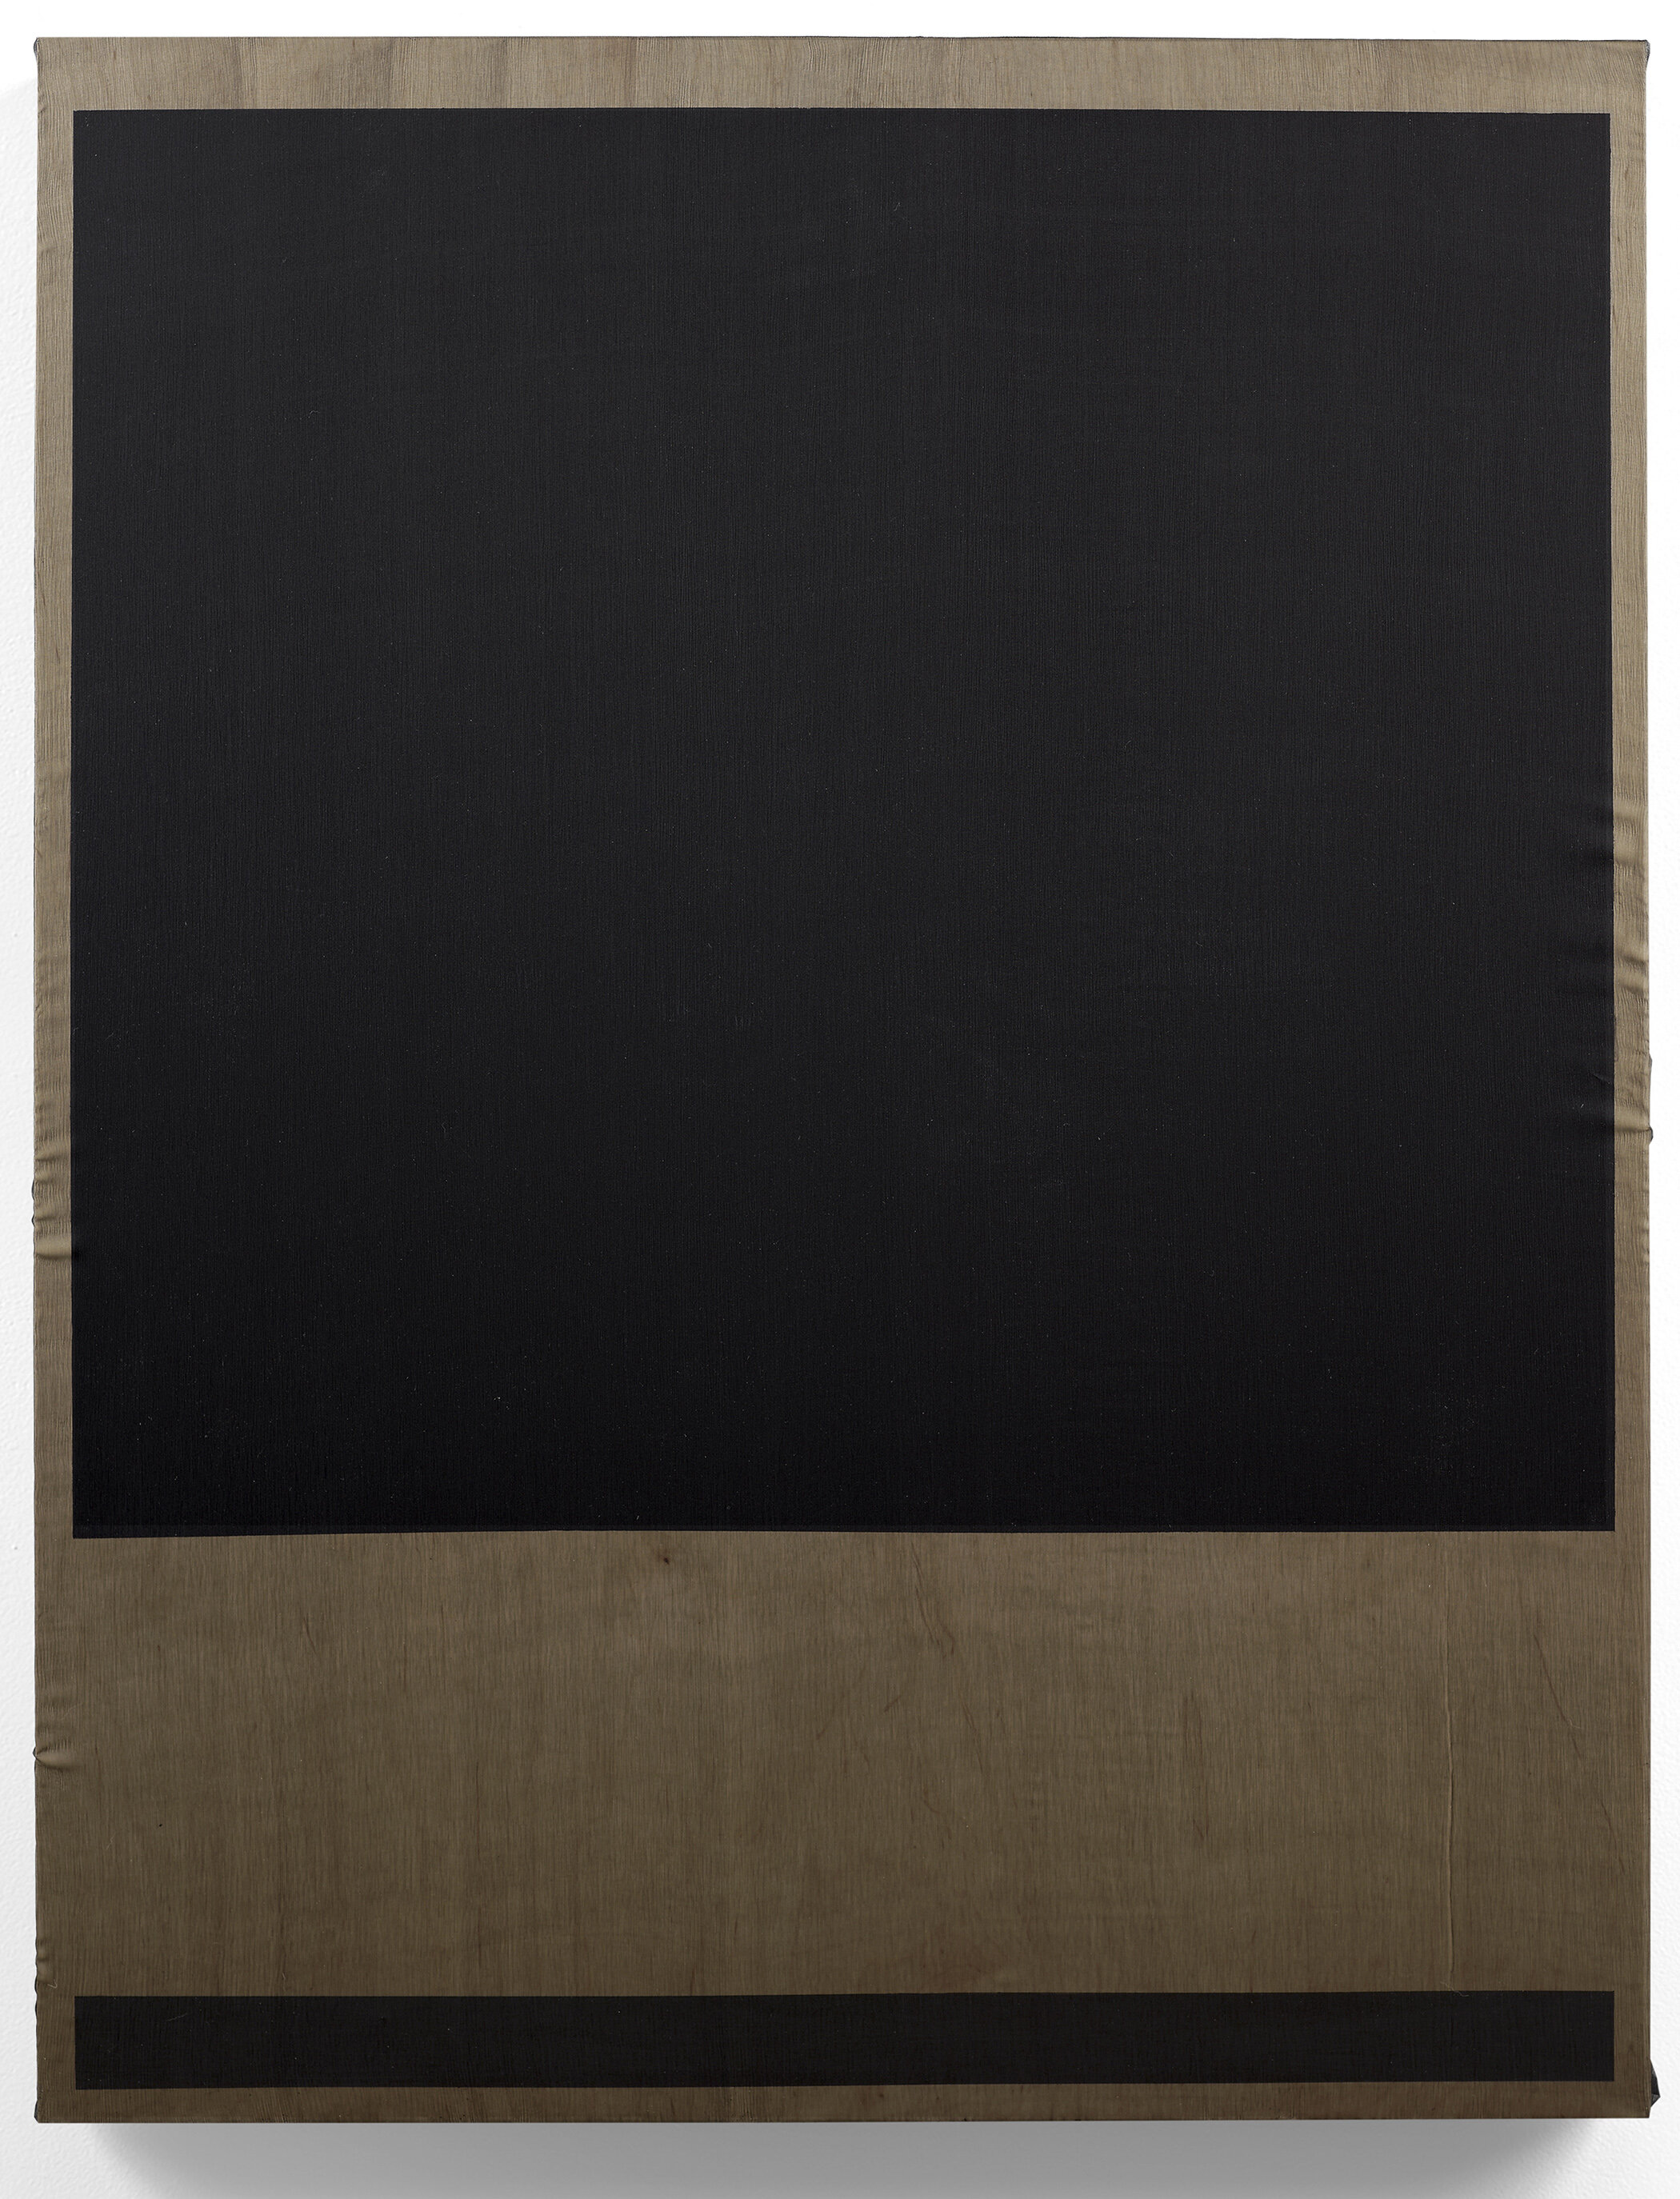  Field Without Color  Bone Char and Graphite on Panel, bound in Silk  41”x53”  2015   